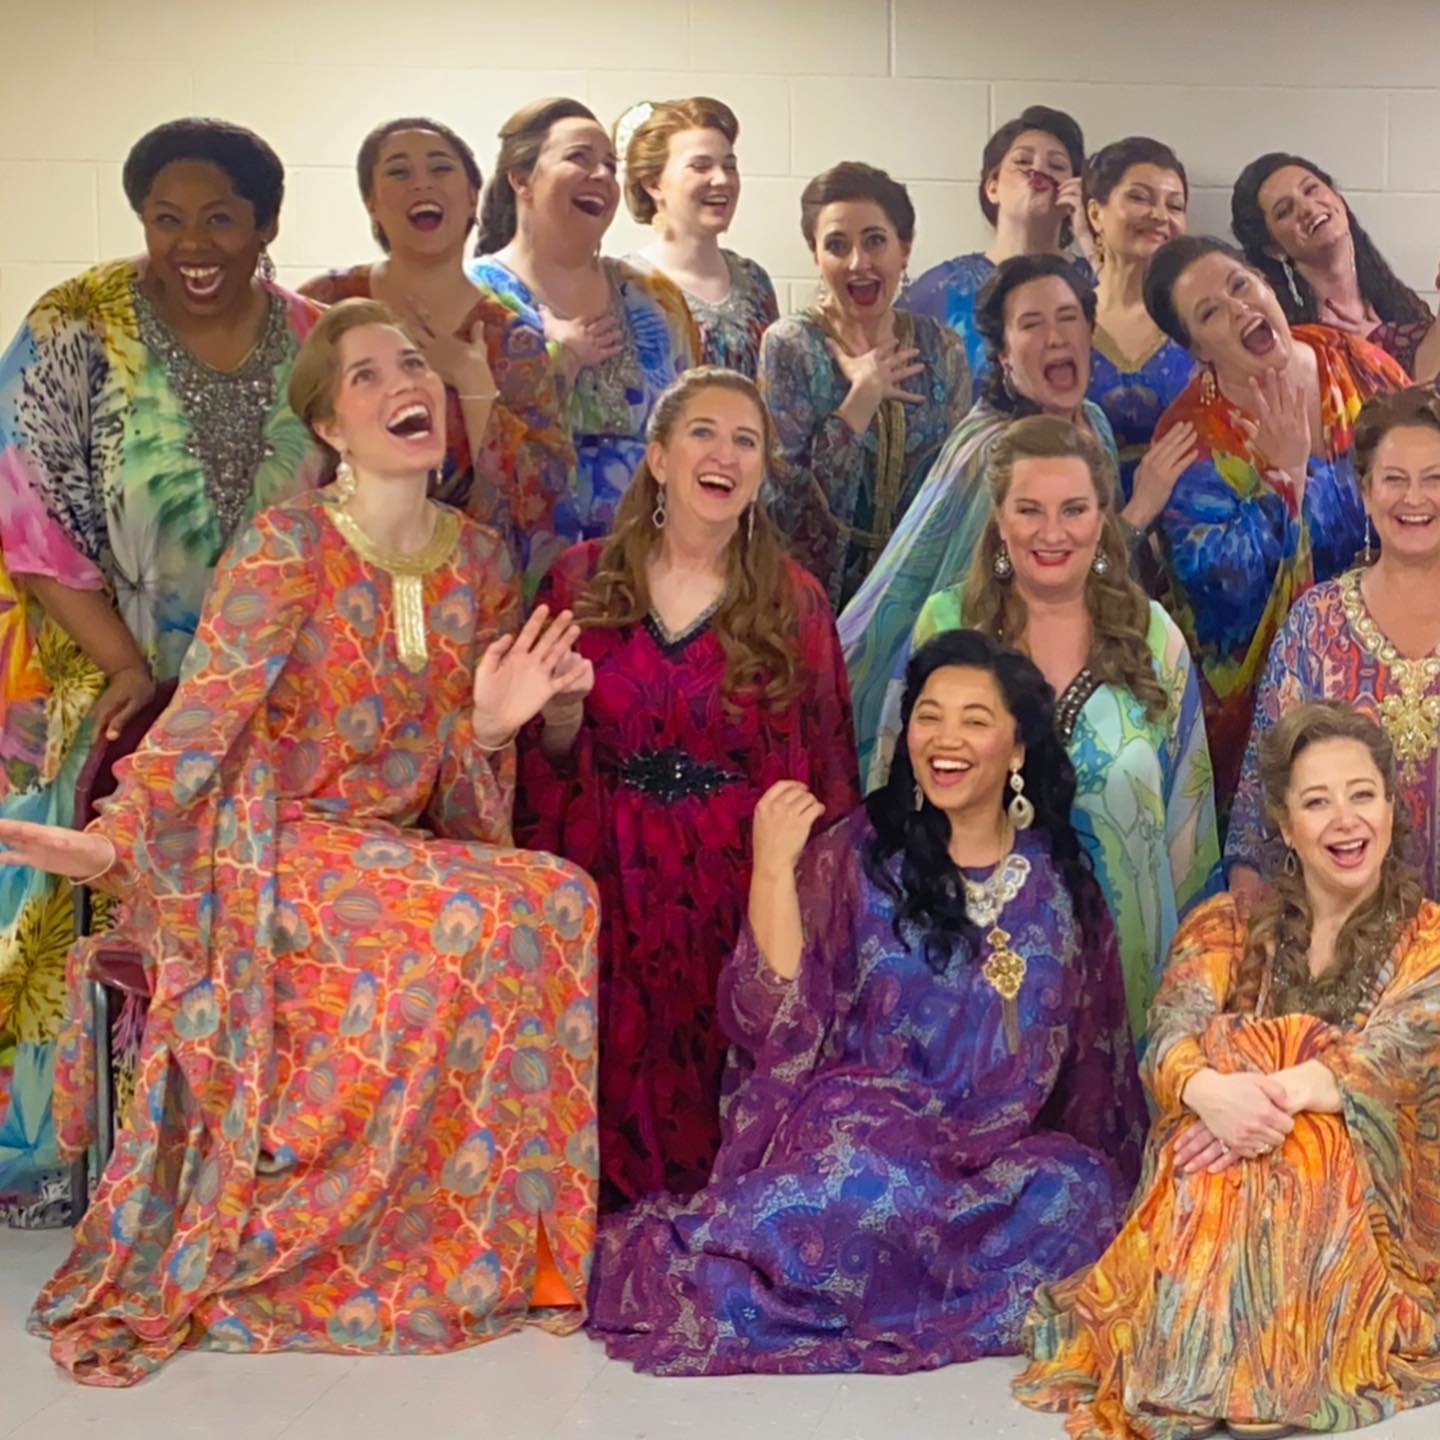 Saying goodbye to this magical production. Too bad I can only tag 20 of ya!! Here&rsquo;s a few more: @marissacontralto @besalikebesame @cg_adams @citrus_soprano @ola.rafalo @elimyp @kelseamelsea @carla_m_janzen @christine.ebeling